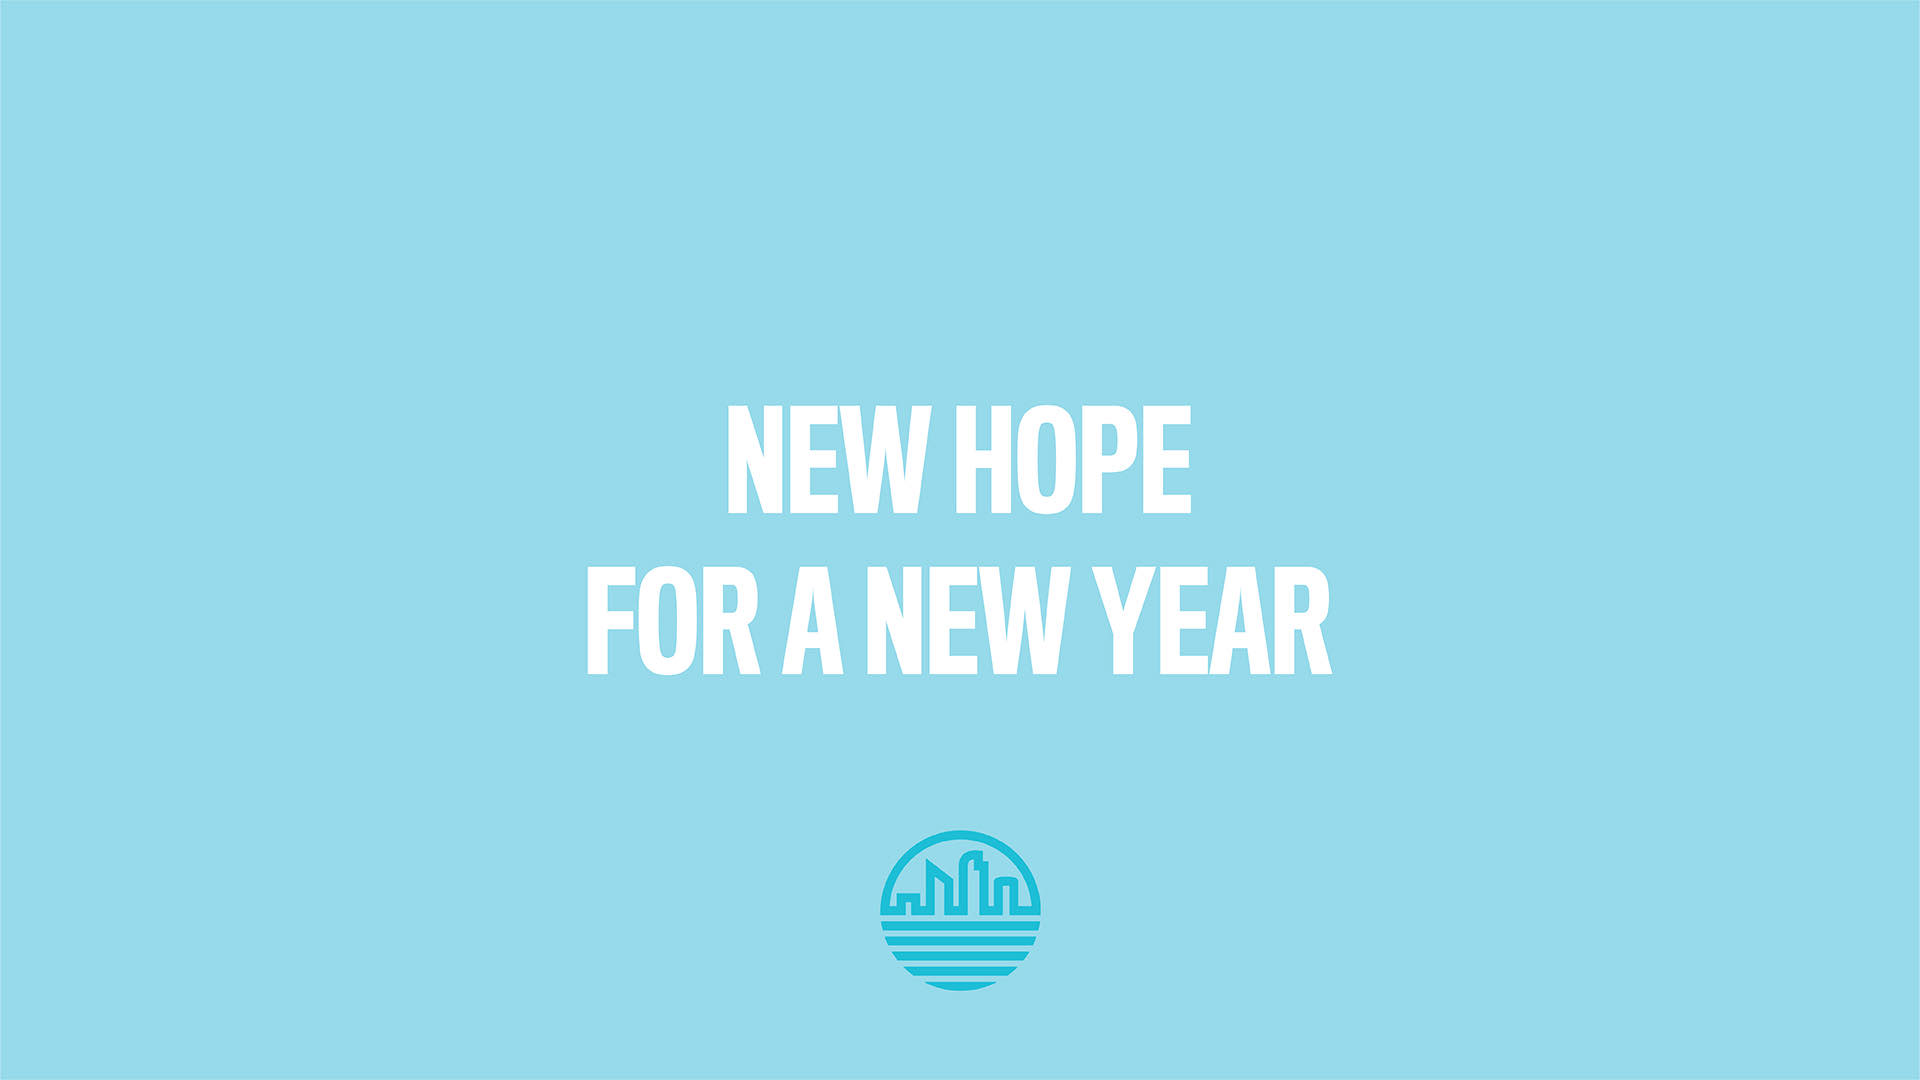 New Hope for a New Year